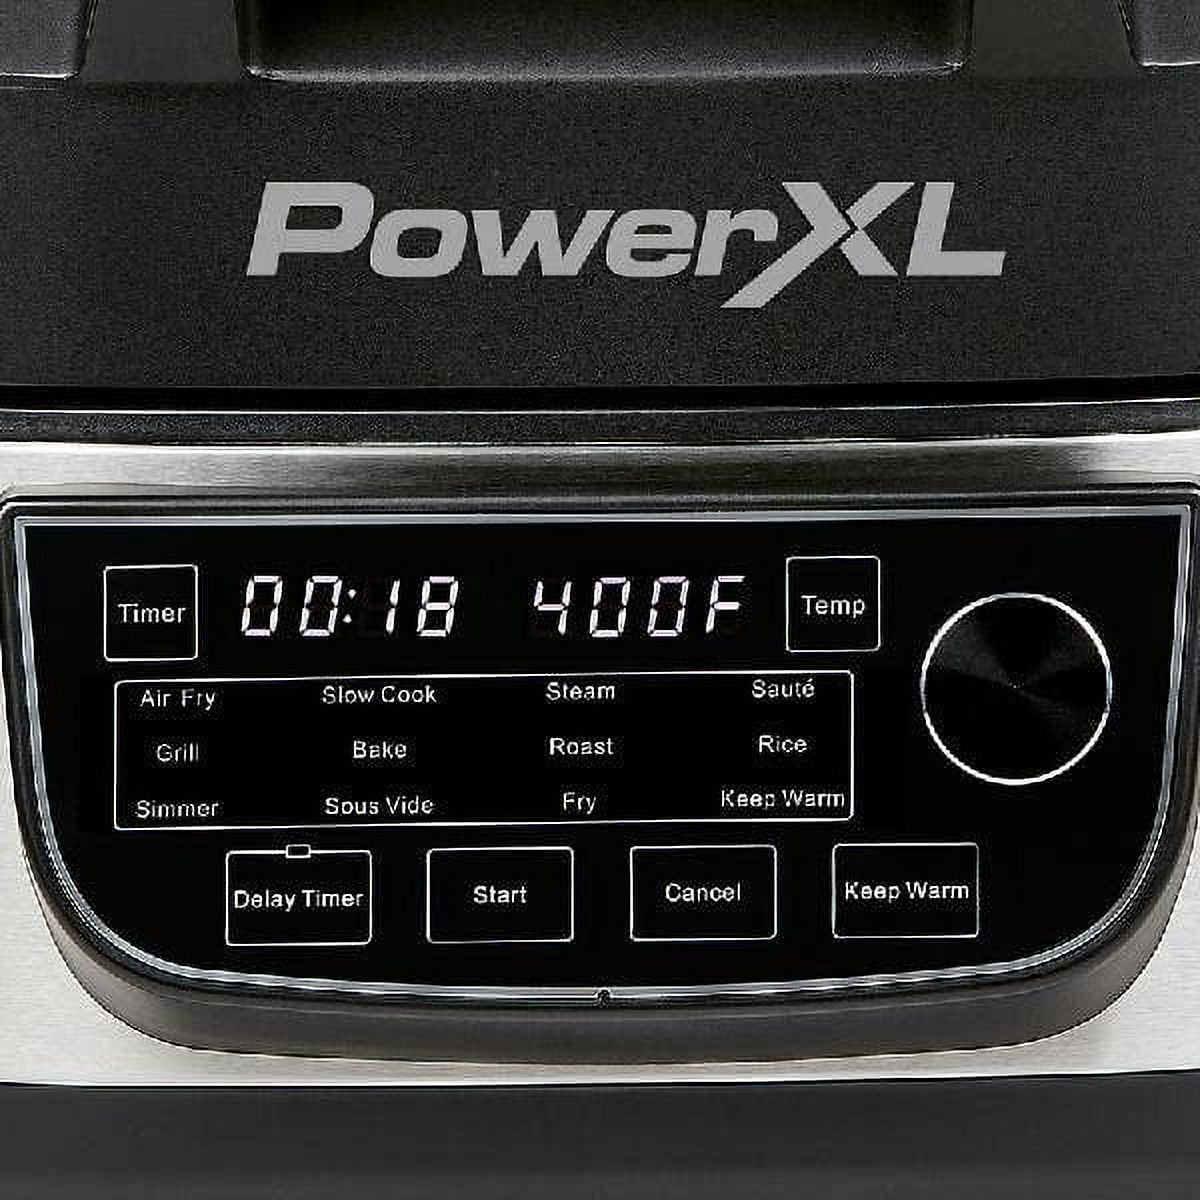 PowerXL GMC01 Grill Air Fryer Combo 6 QT 12-in-1 Indoor Grill, Air Fryer